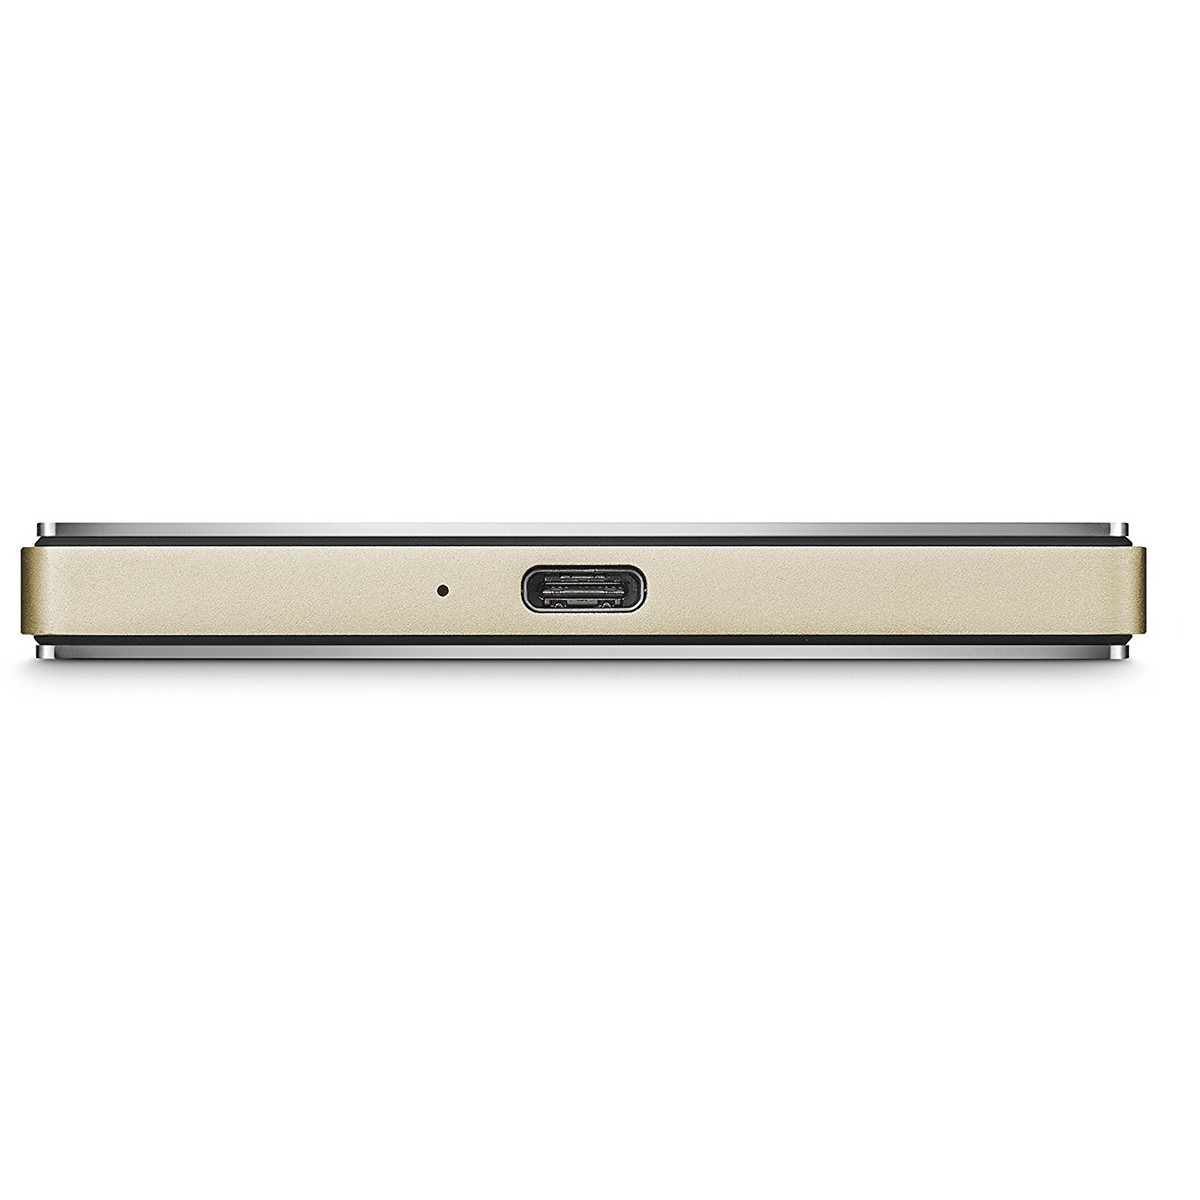 External Hard Drive For Mac And Pc Interchangeable